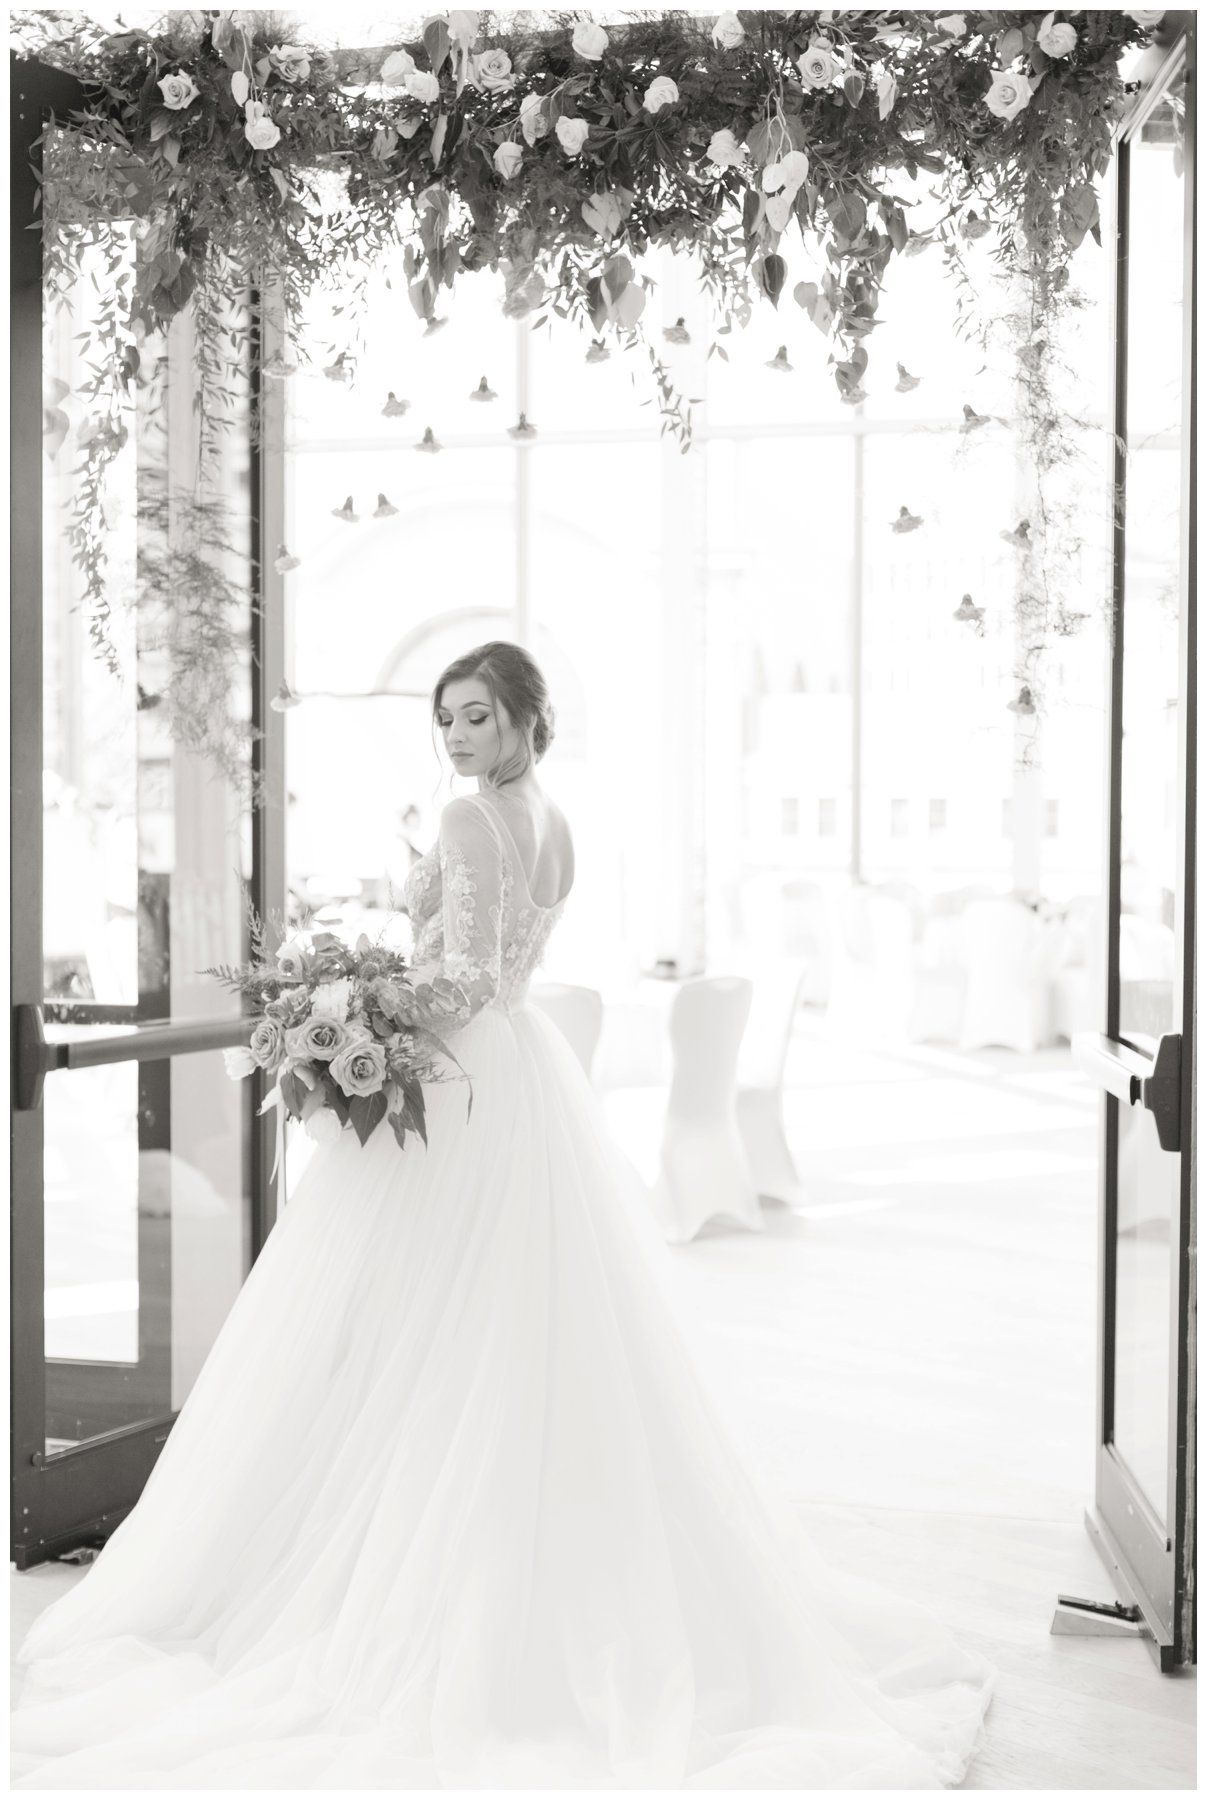 Fairytale wedding with lots of florals - Flower doorway arch by Capital Florist- Bride with white Nicole Spose’s dress from Sinders Bridal at Ottawa's NAC O'Born room wedding venue: The Barnett Company - Ottawa Wedding Photographer